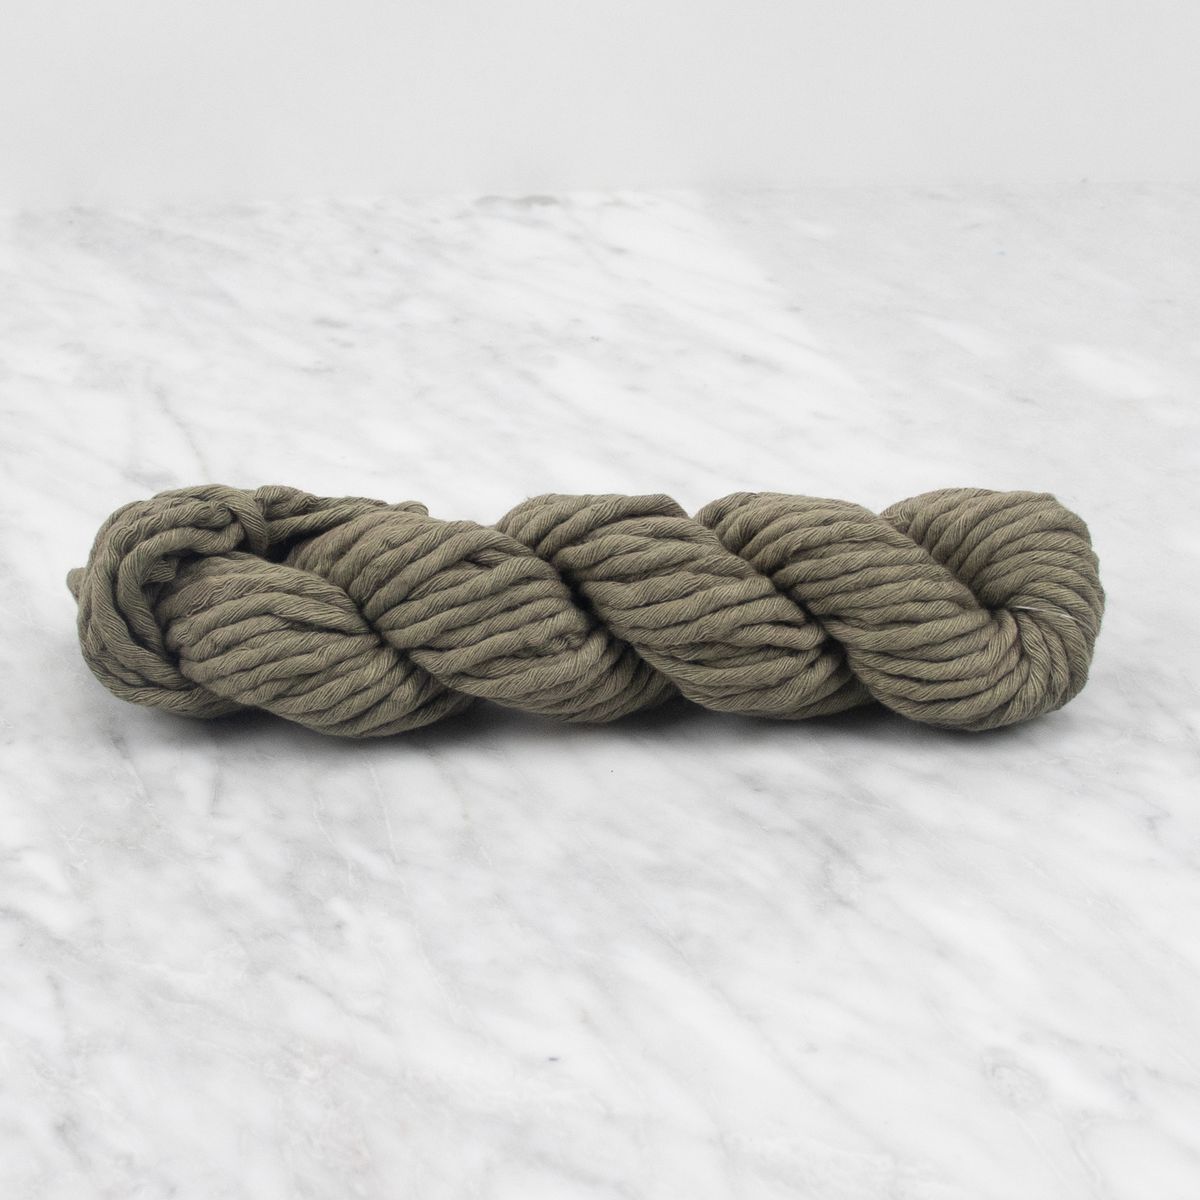 5mm Hand-Dyed Cotton String - Silver Grey - 100 grams